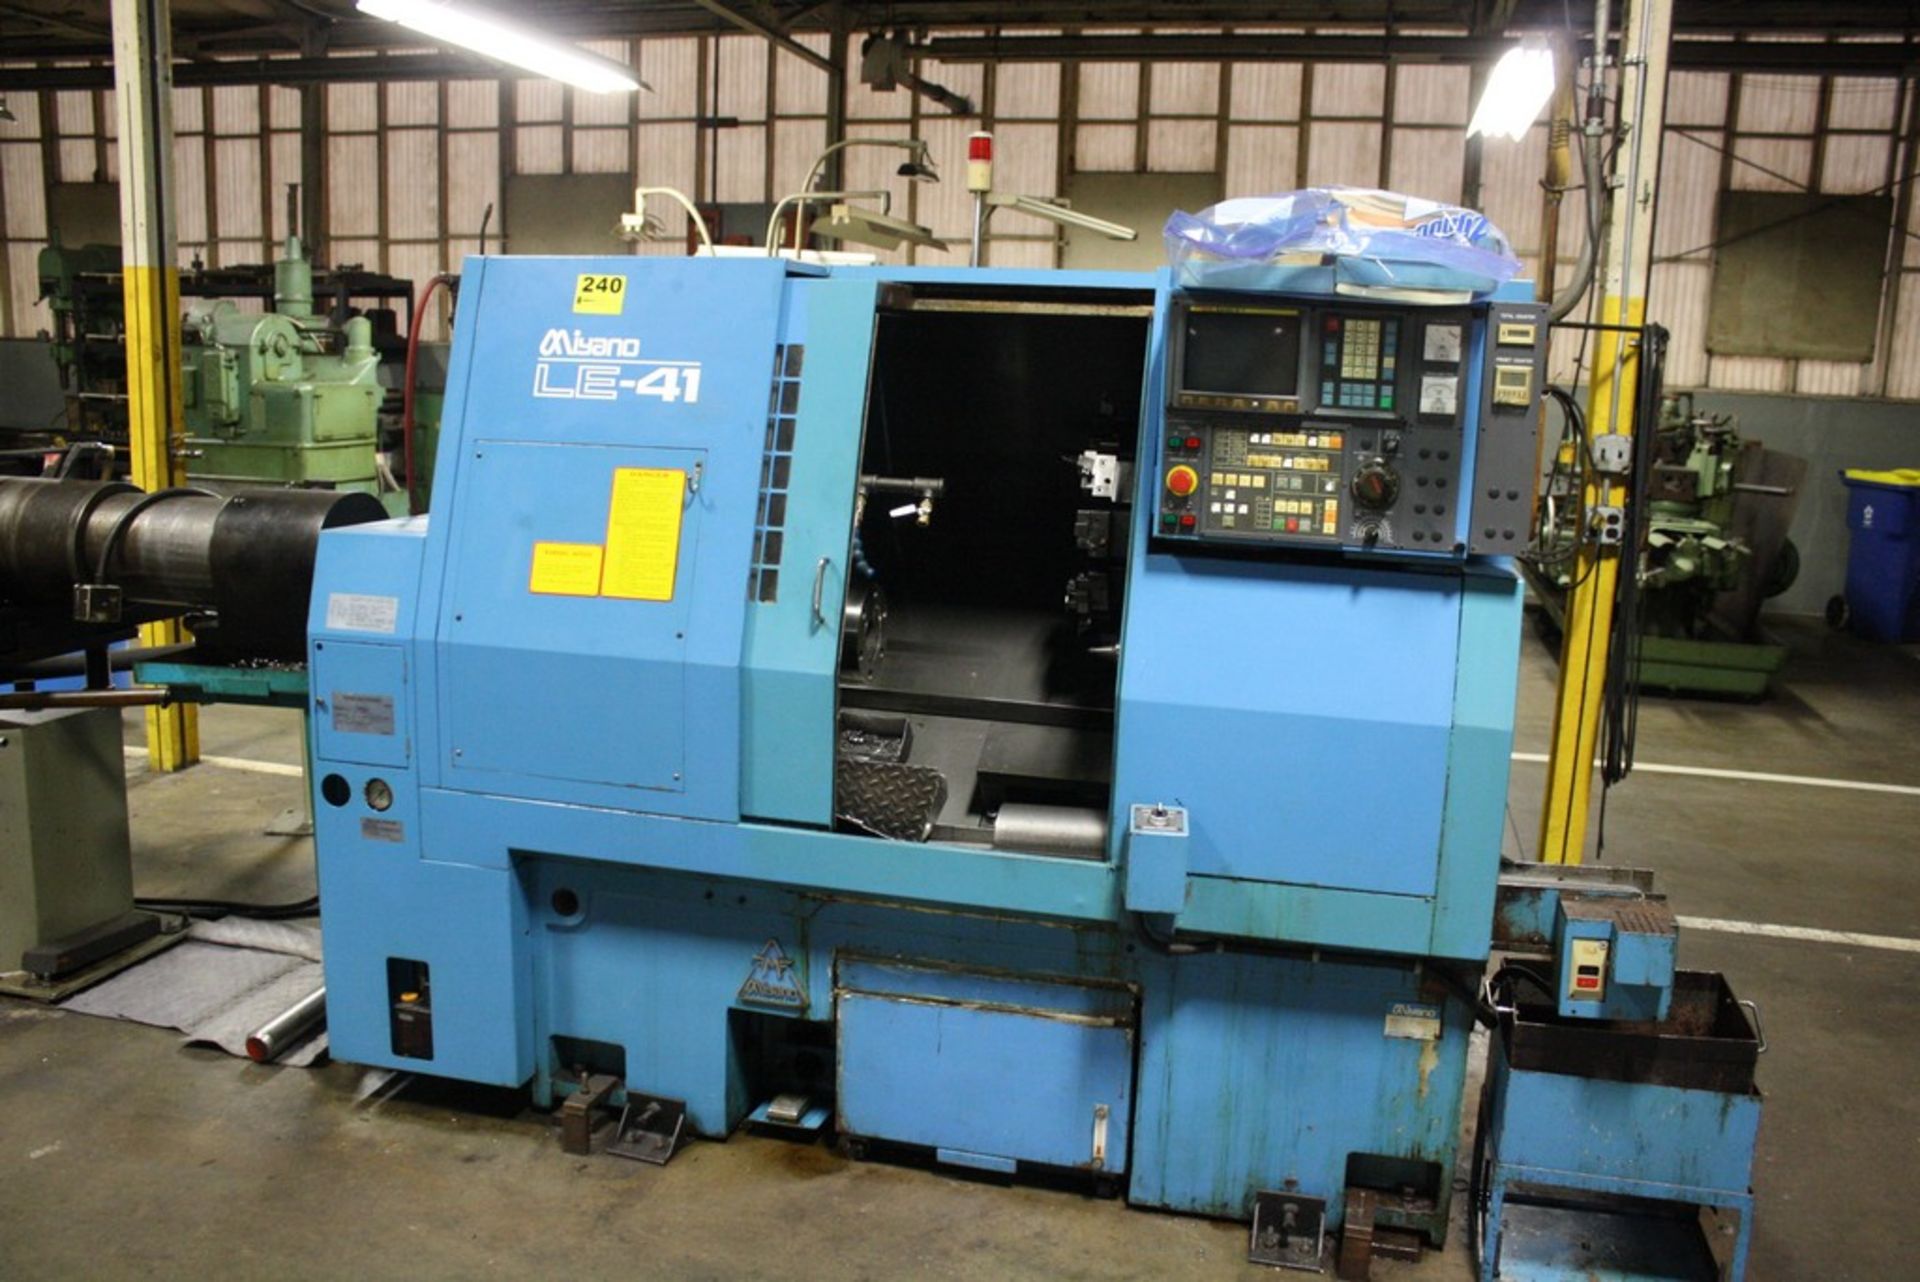 MIYANO MODEL LE-41 CNC TURNING CENTER, S/N L410019, 3-1/8" HOLE THRU SPINDLE, TAILSTOCK, PARTS - Image 2 of 7